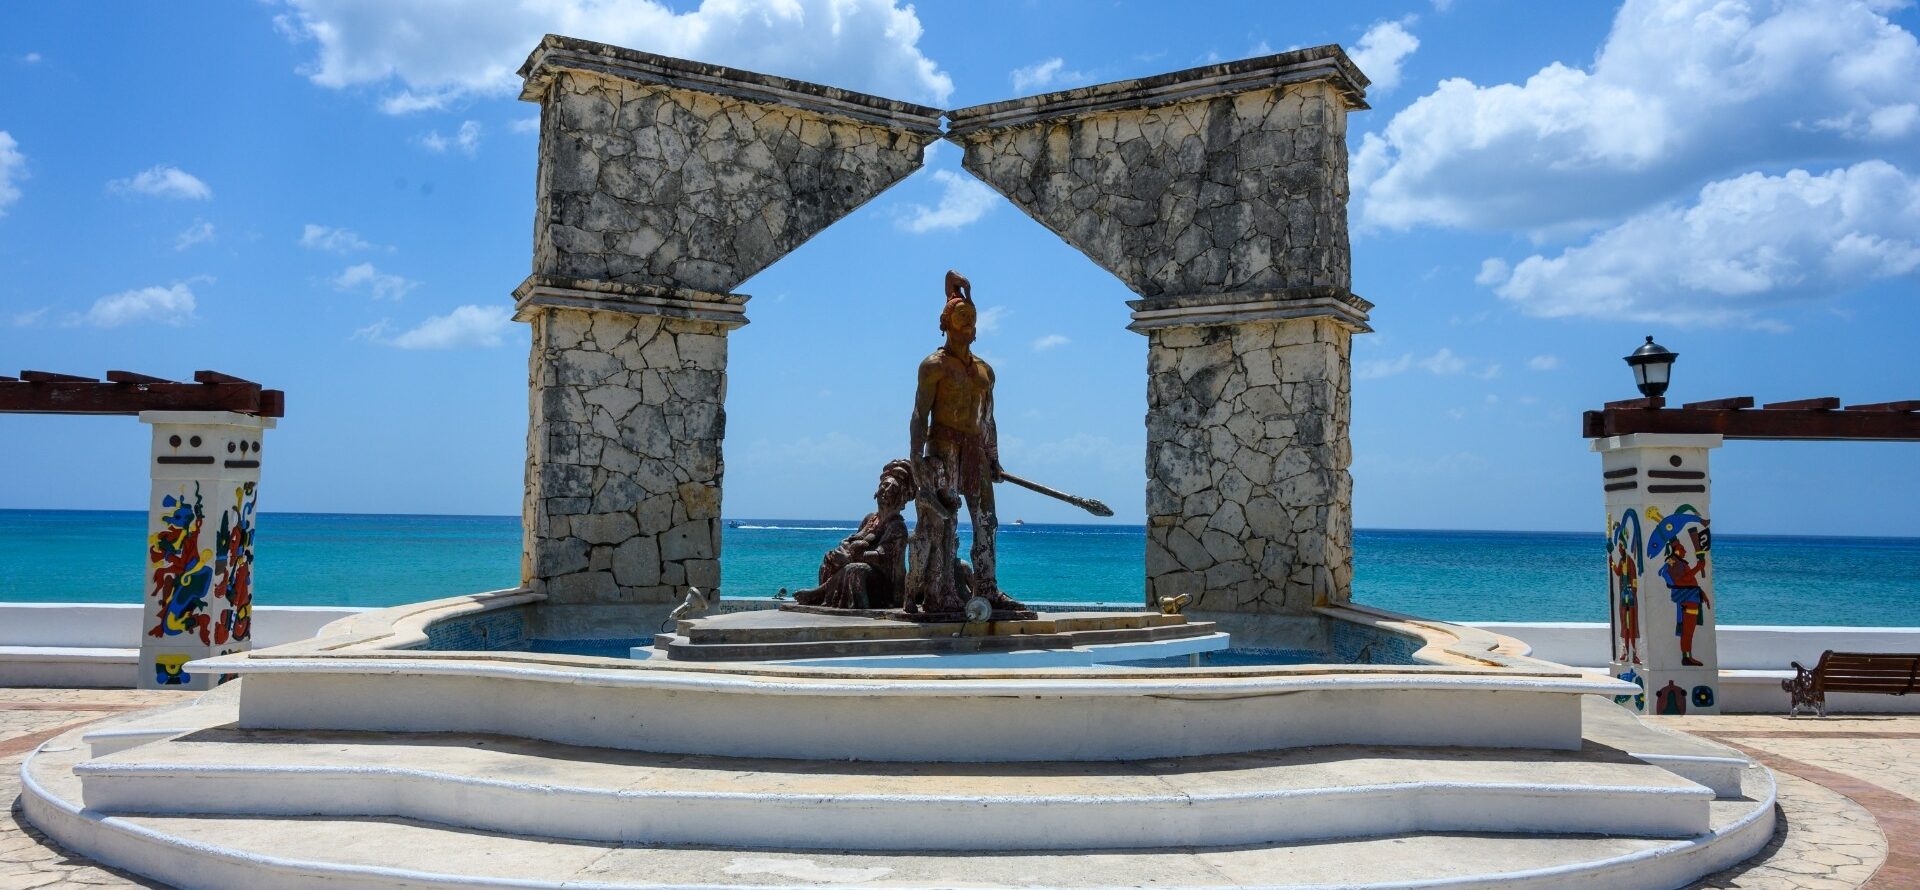 12 Best Things to Do in Cozumel | Celebrity Cruises